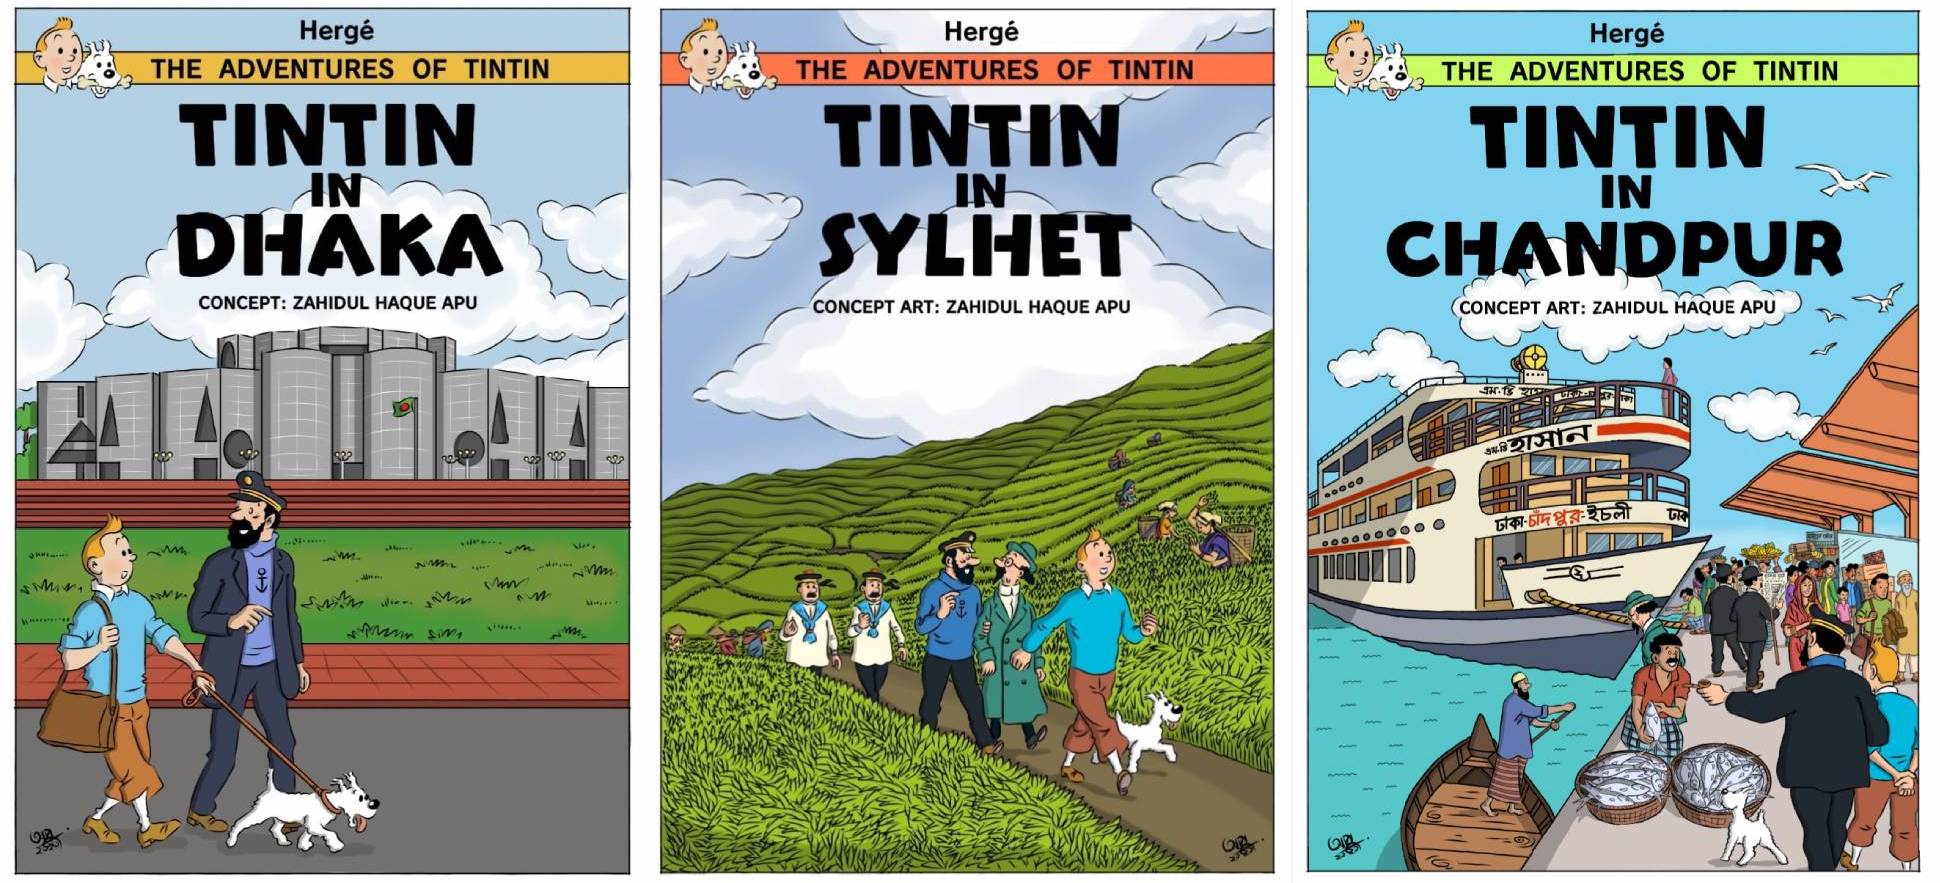 Tintin in Bangladesh…. only in the artist's imagination!